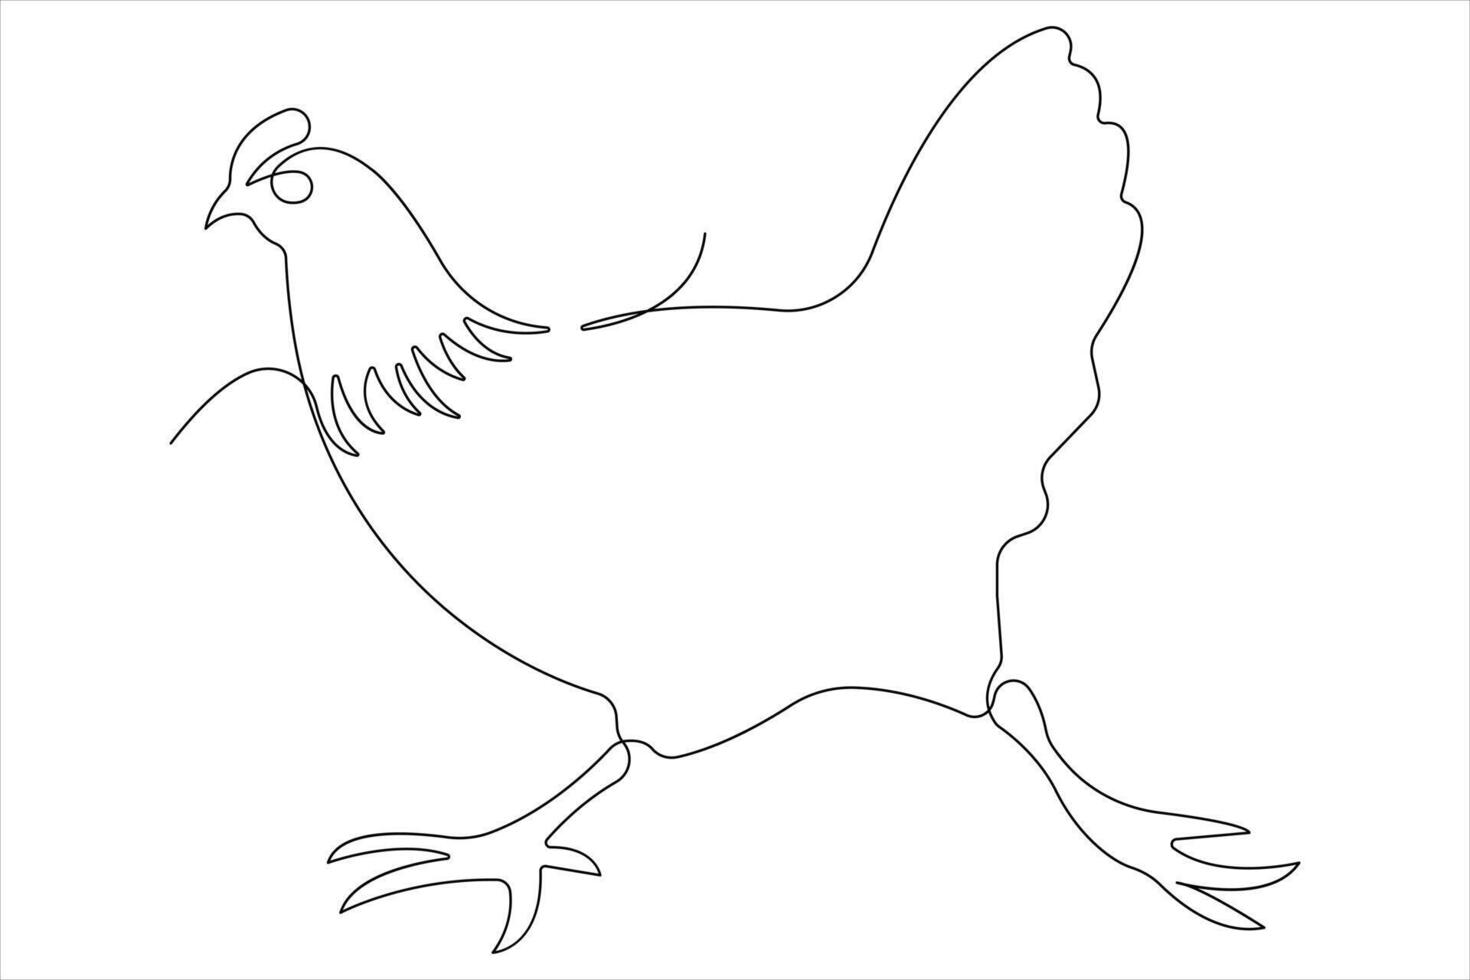 Continuous one line art drawing of pet animal chicken concept outline vector illustration